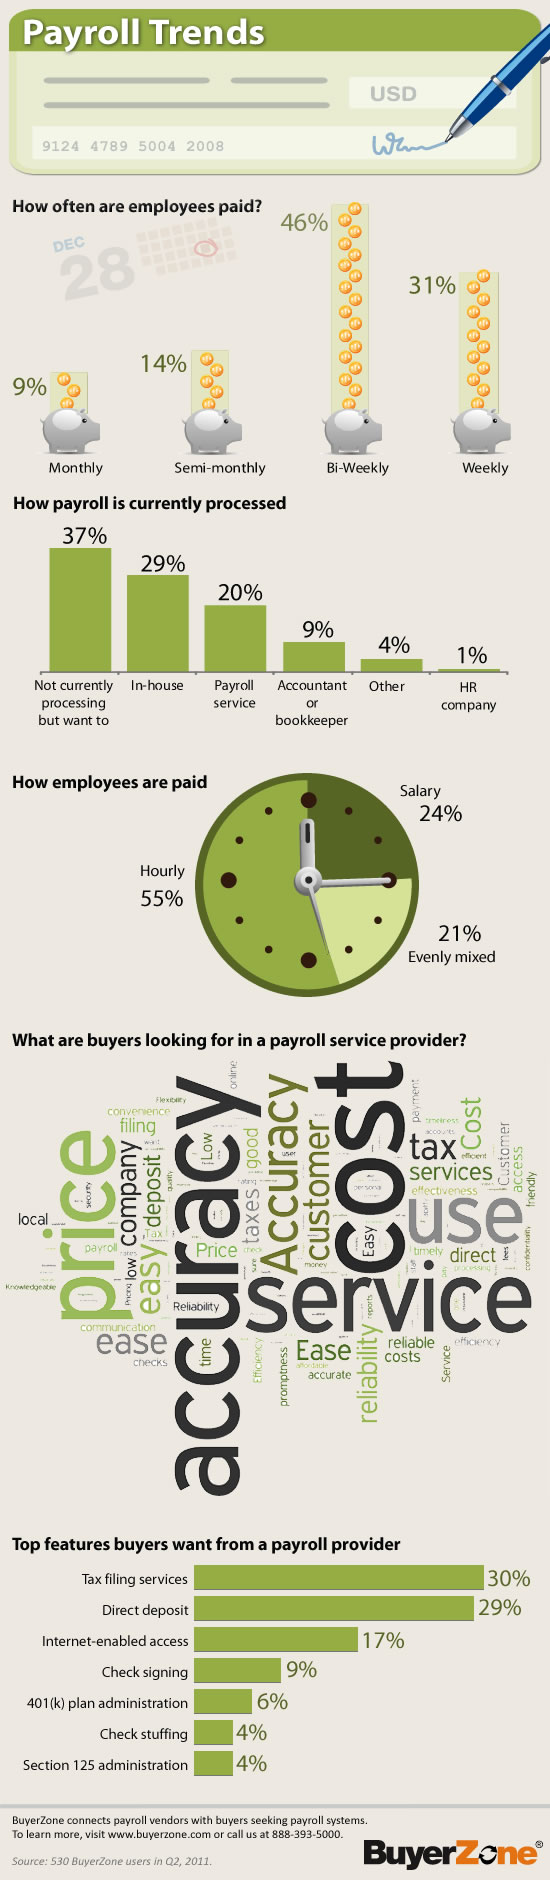 Payroll trends infographic